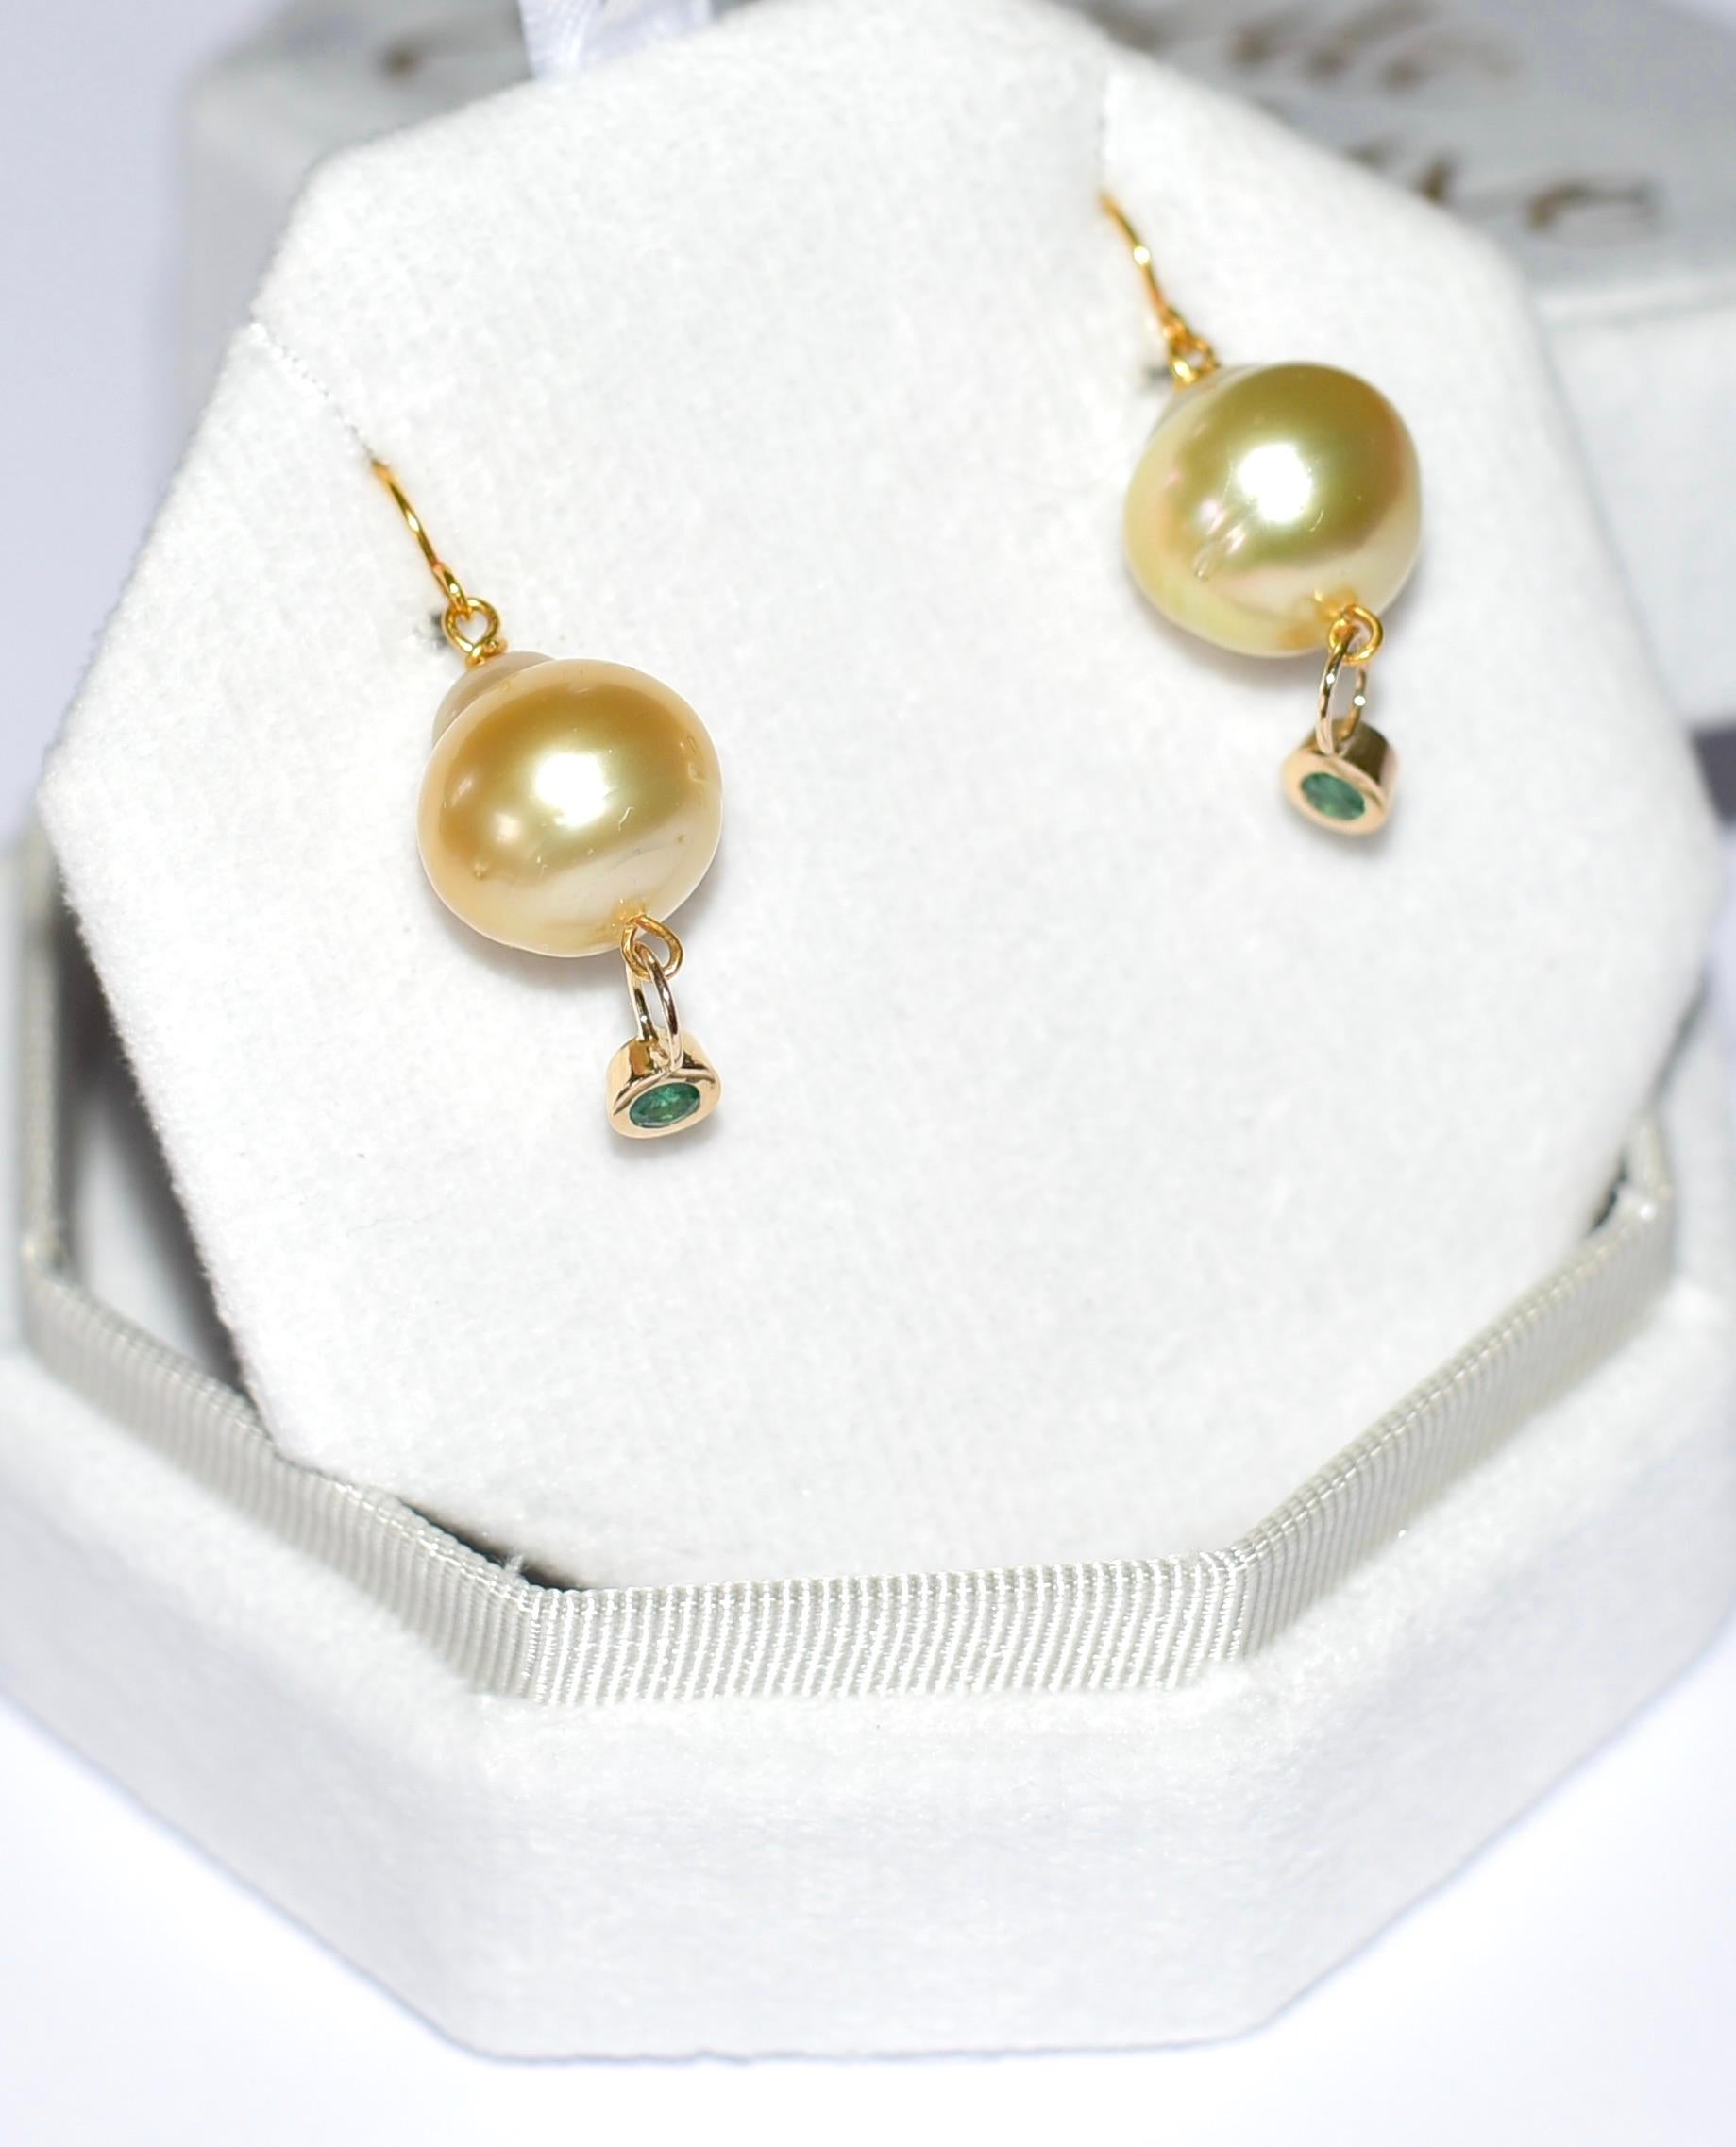 Round Cut Golden South Sea Pearl and Natural Emerald Earrings in 18K Solid Yellow Gold